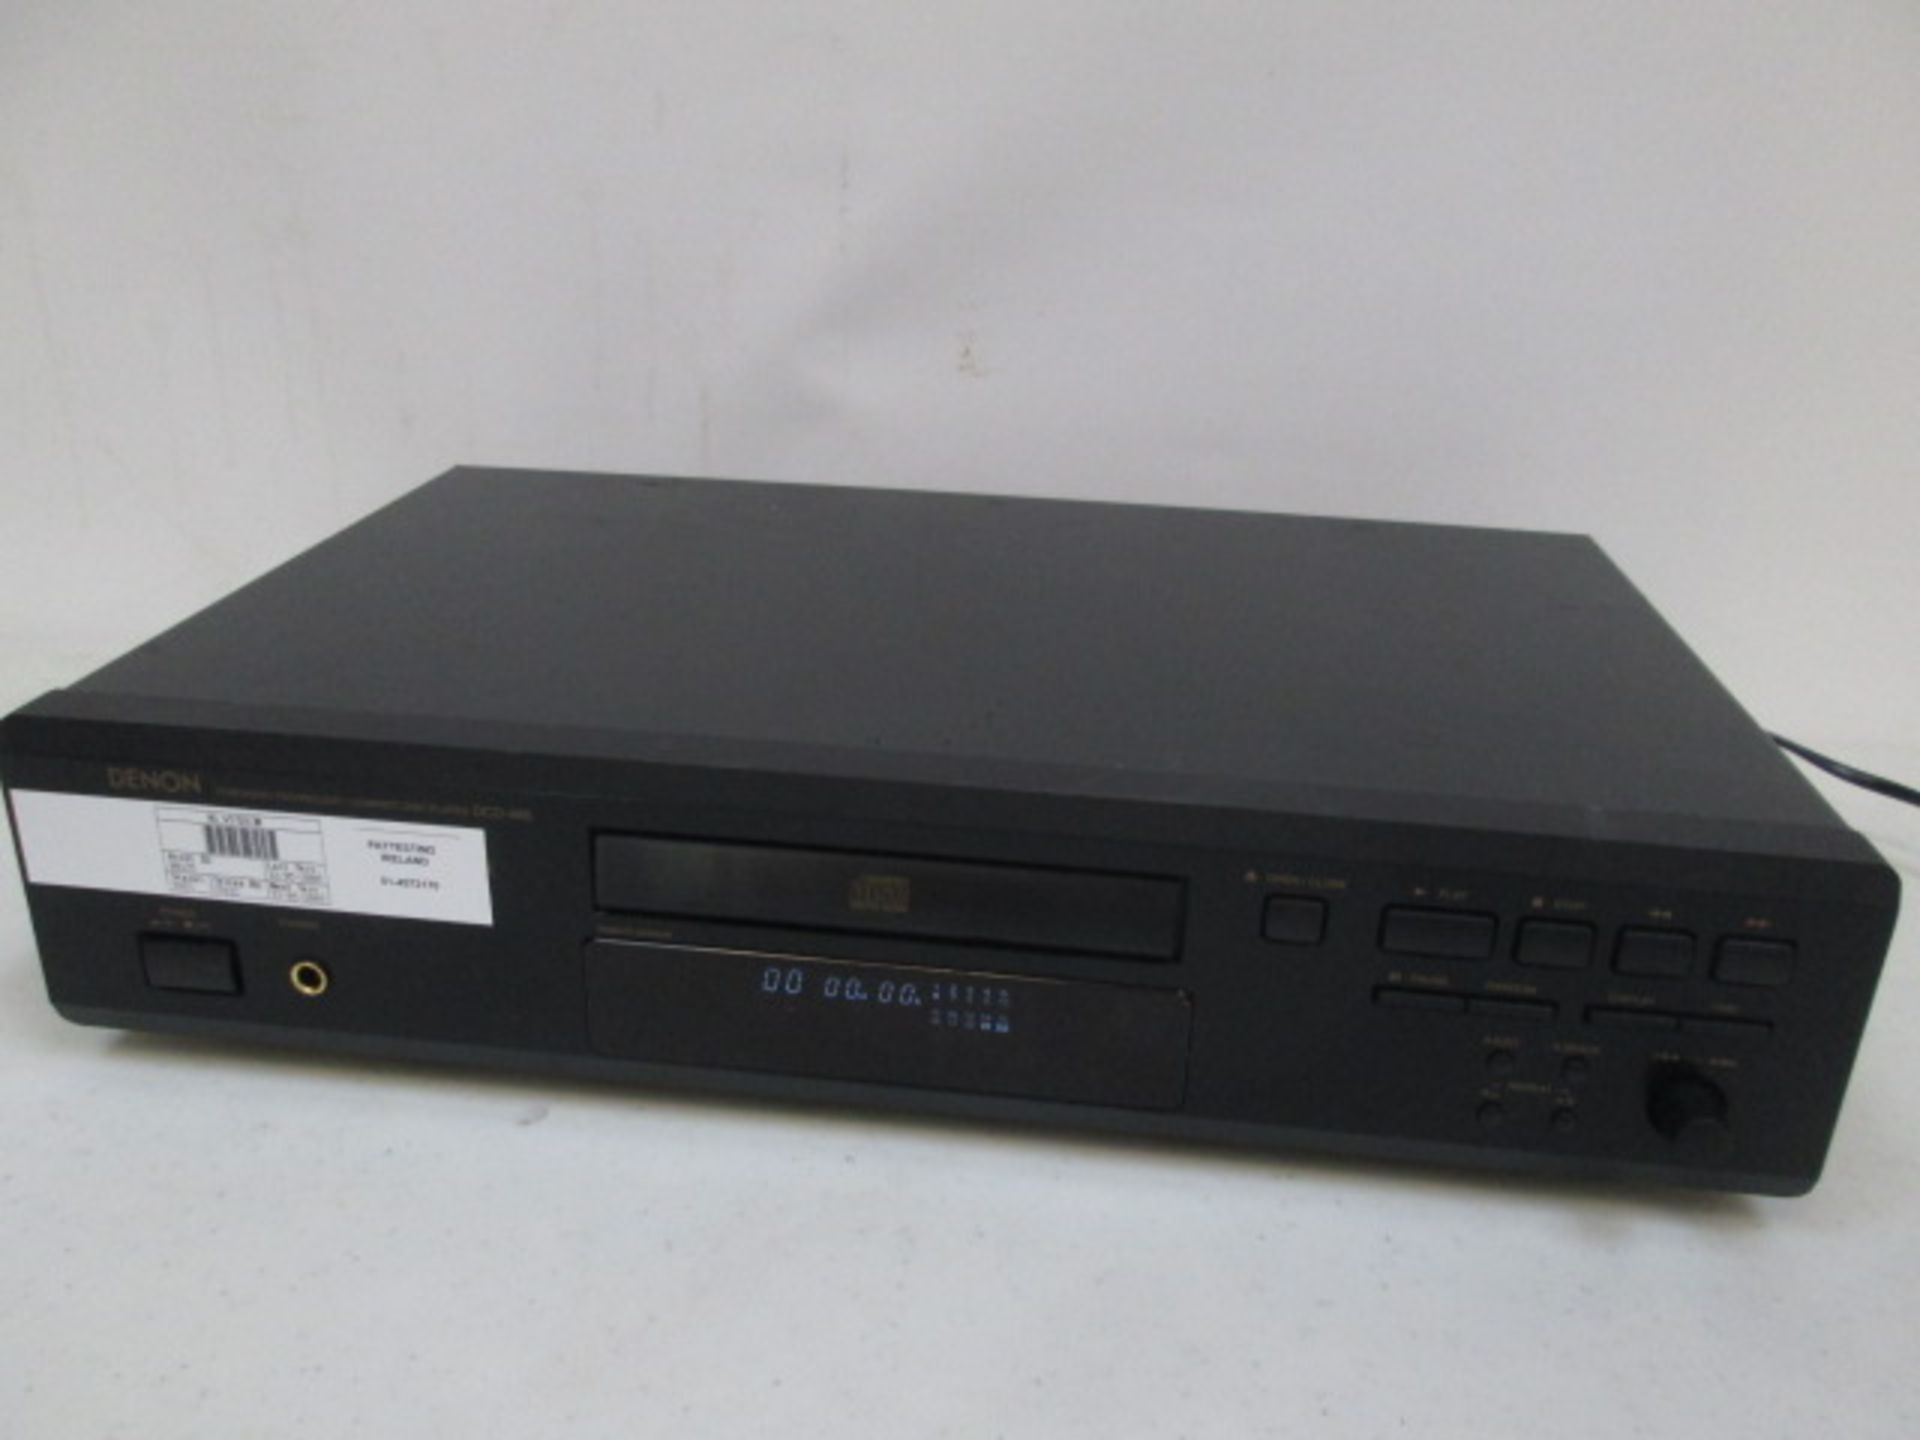 Denon Compact Disc Player, Model DCD-485. Comes with Power Supply.